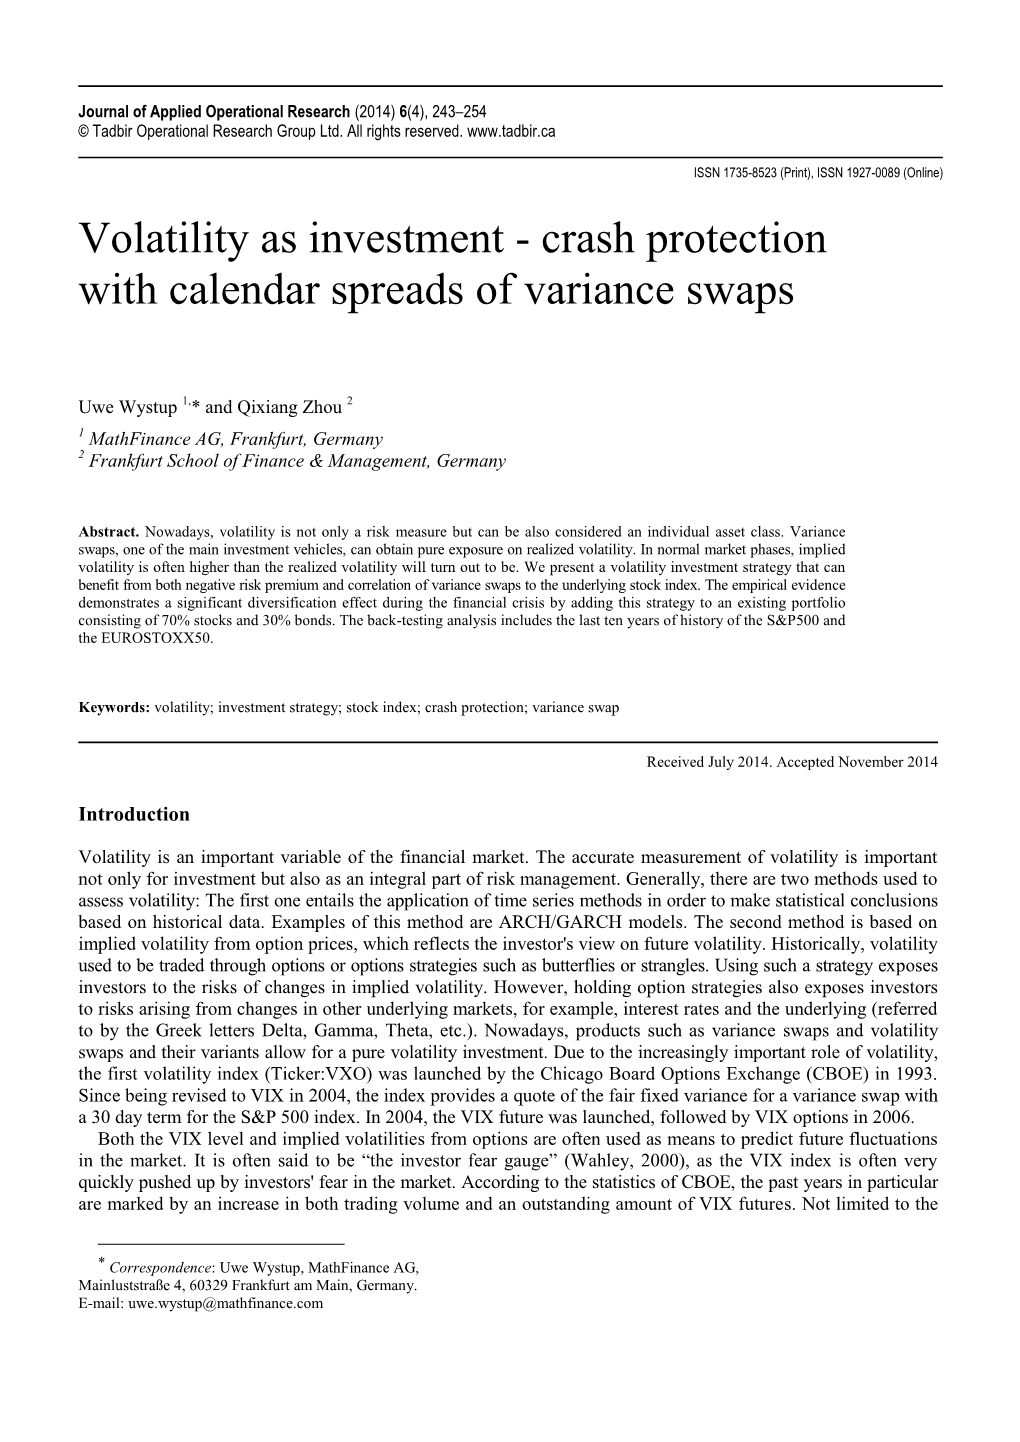 Volatility As Investment - Crash Protection with Calendar Spreads of Variance Swaps